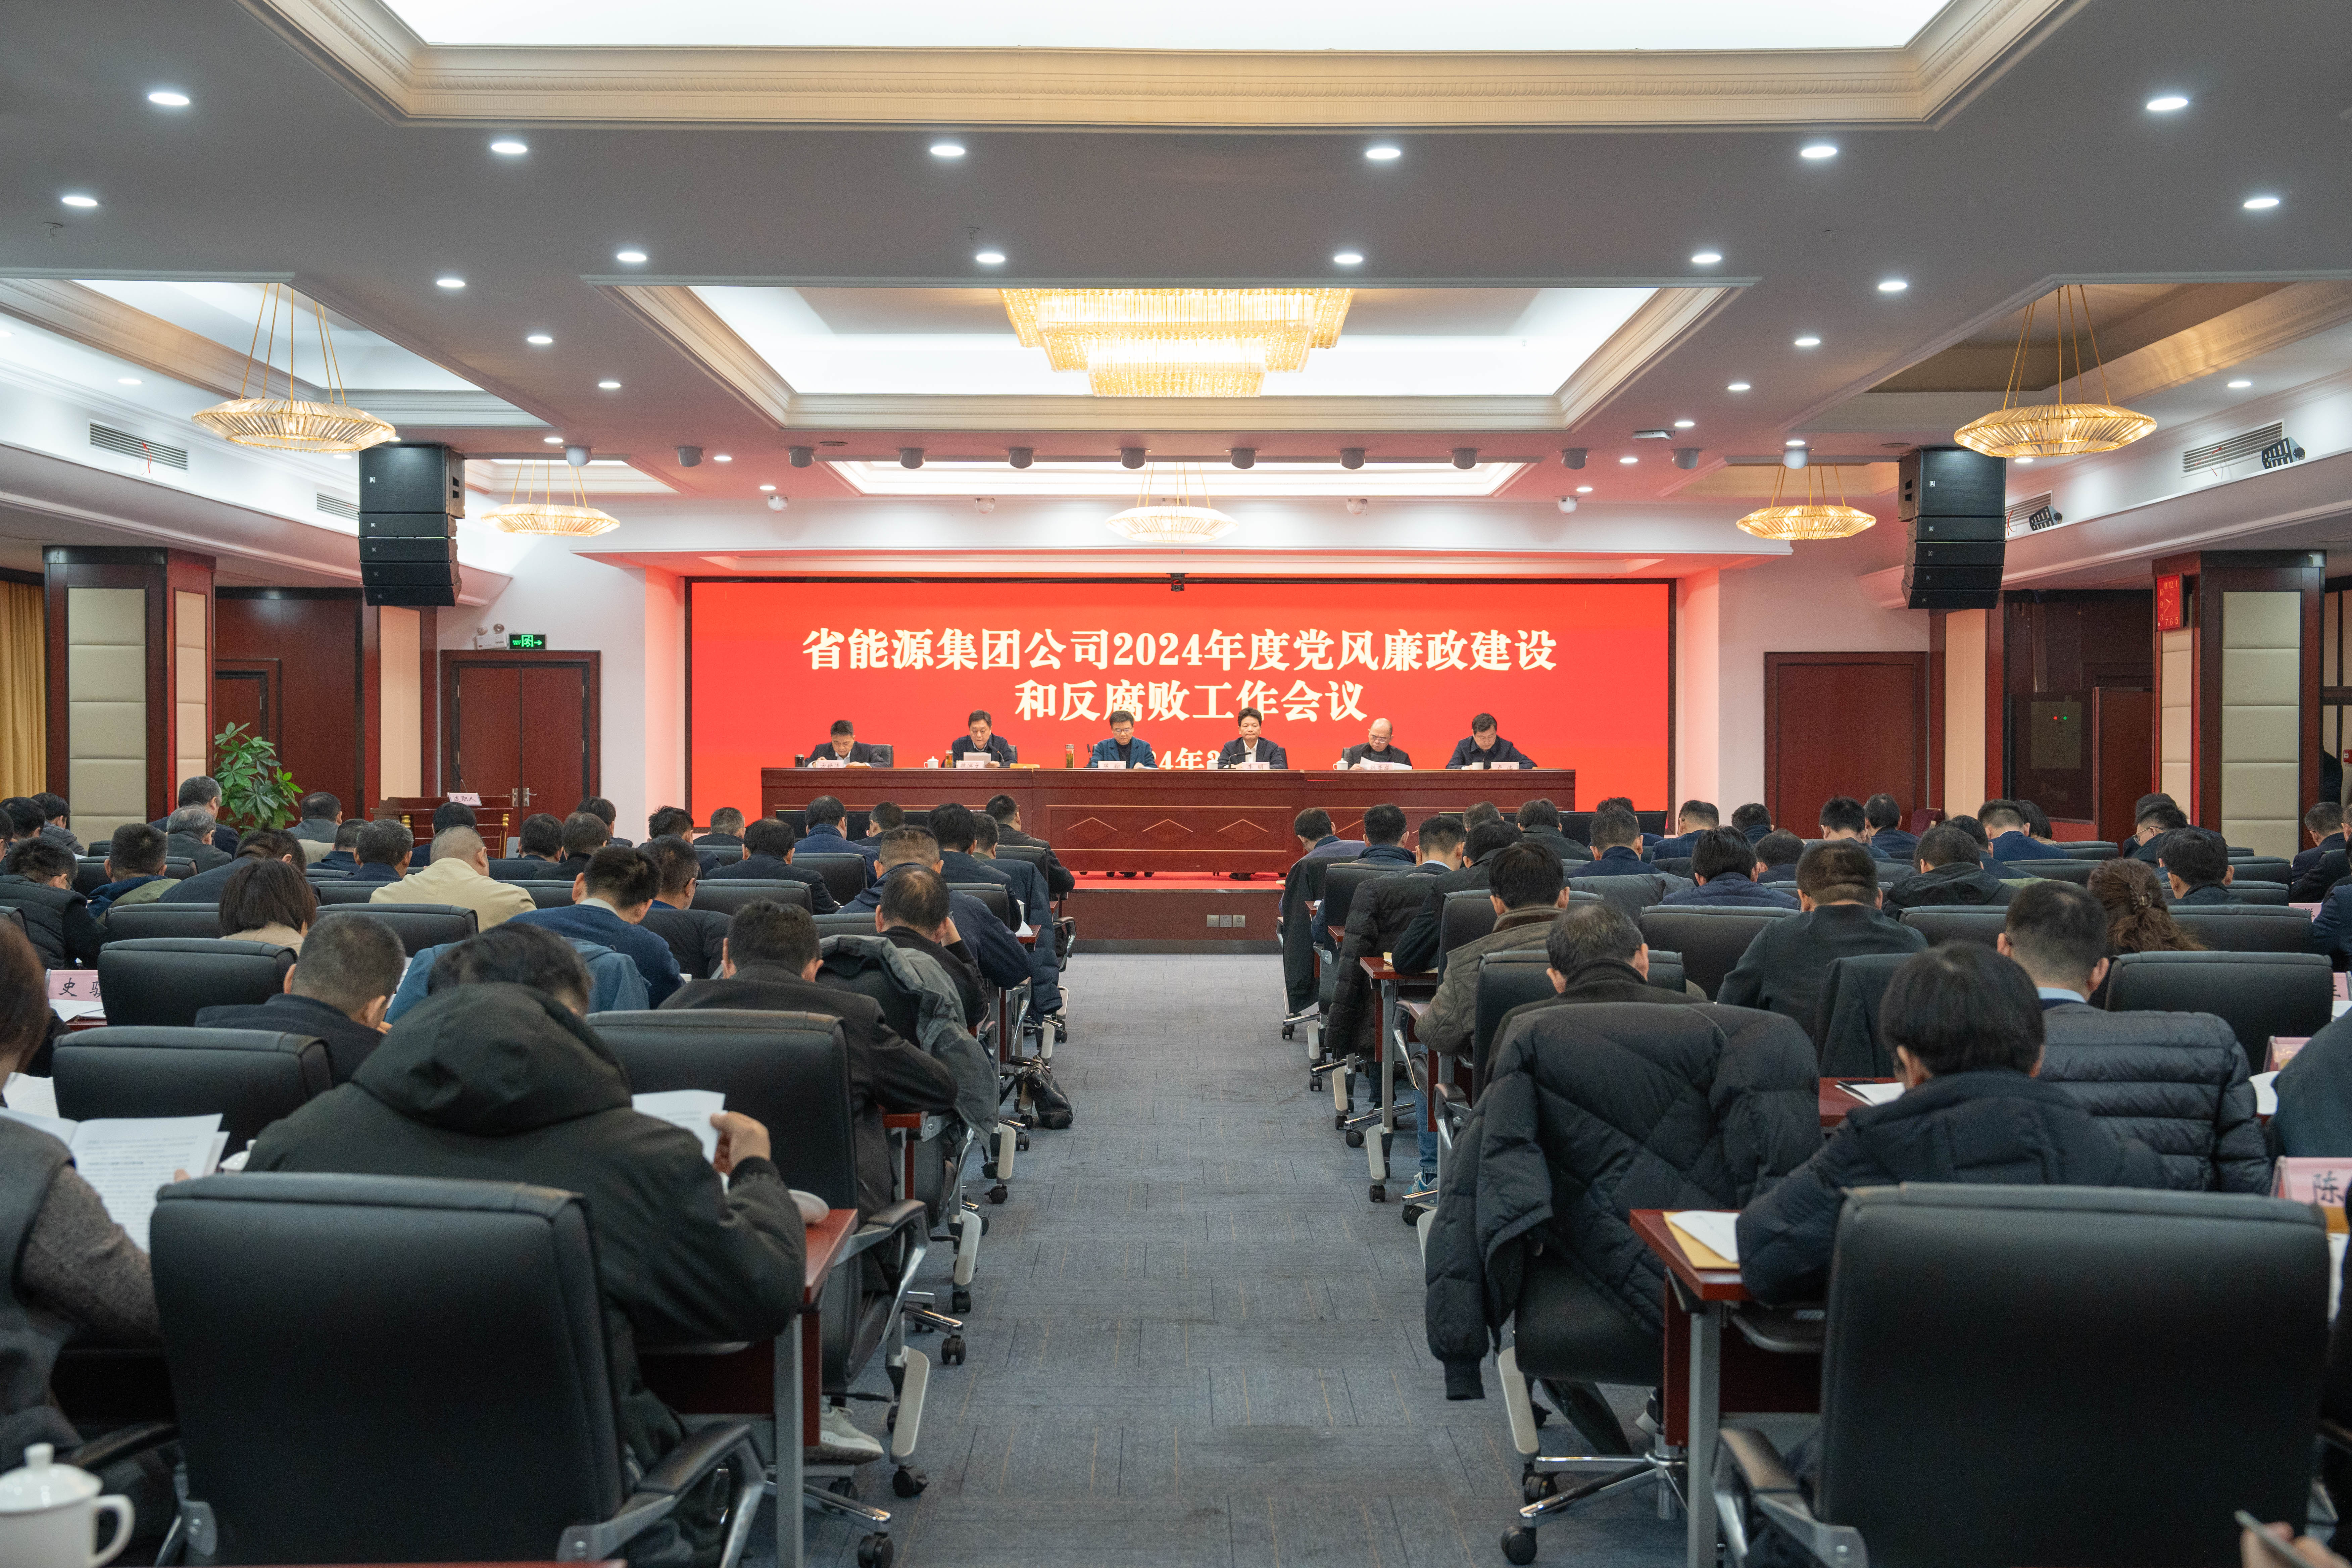 The group company held the 2024 party style and clean government construction and anti -corruption work conference